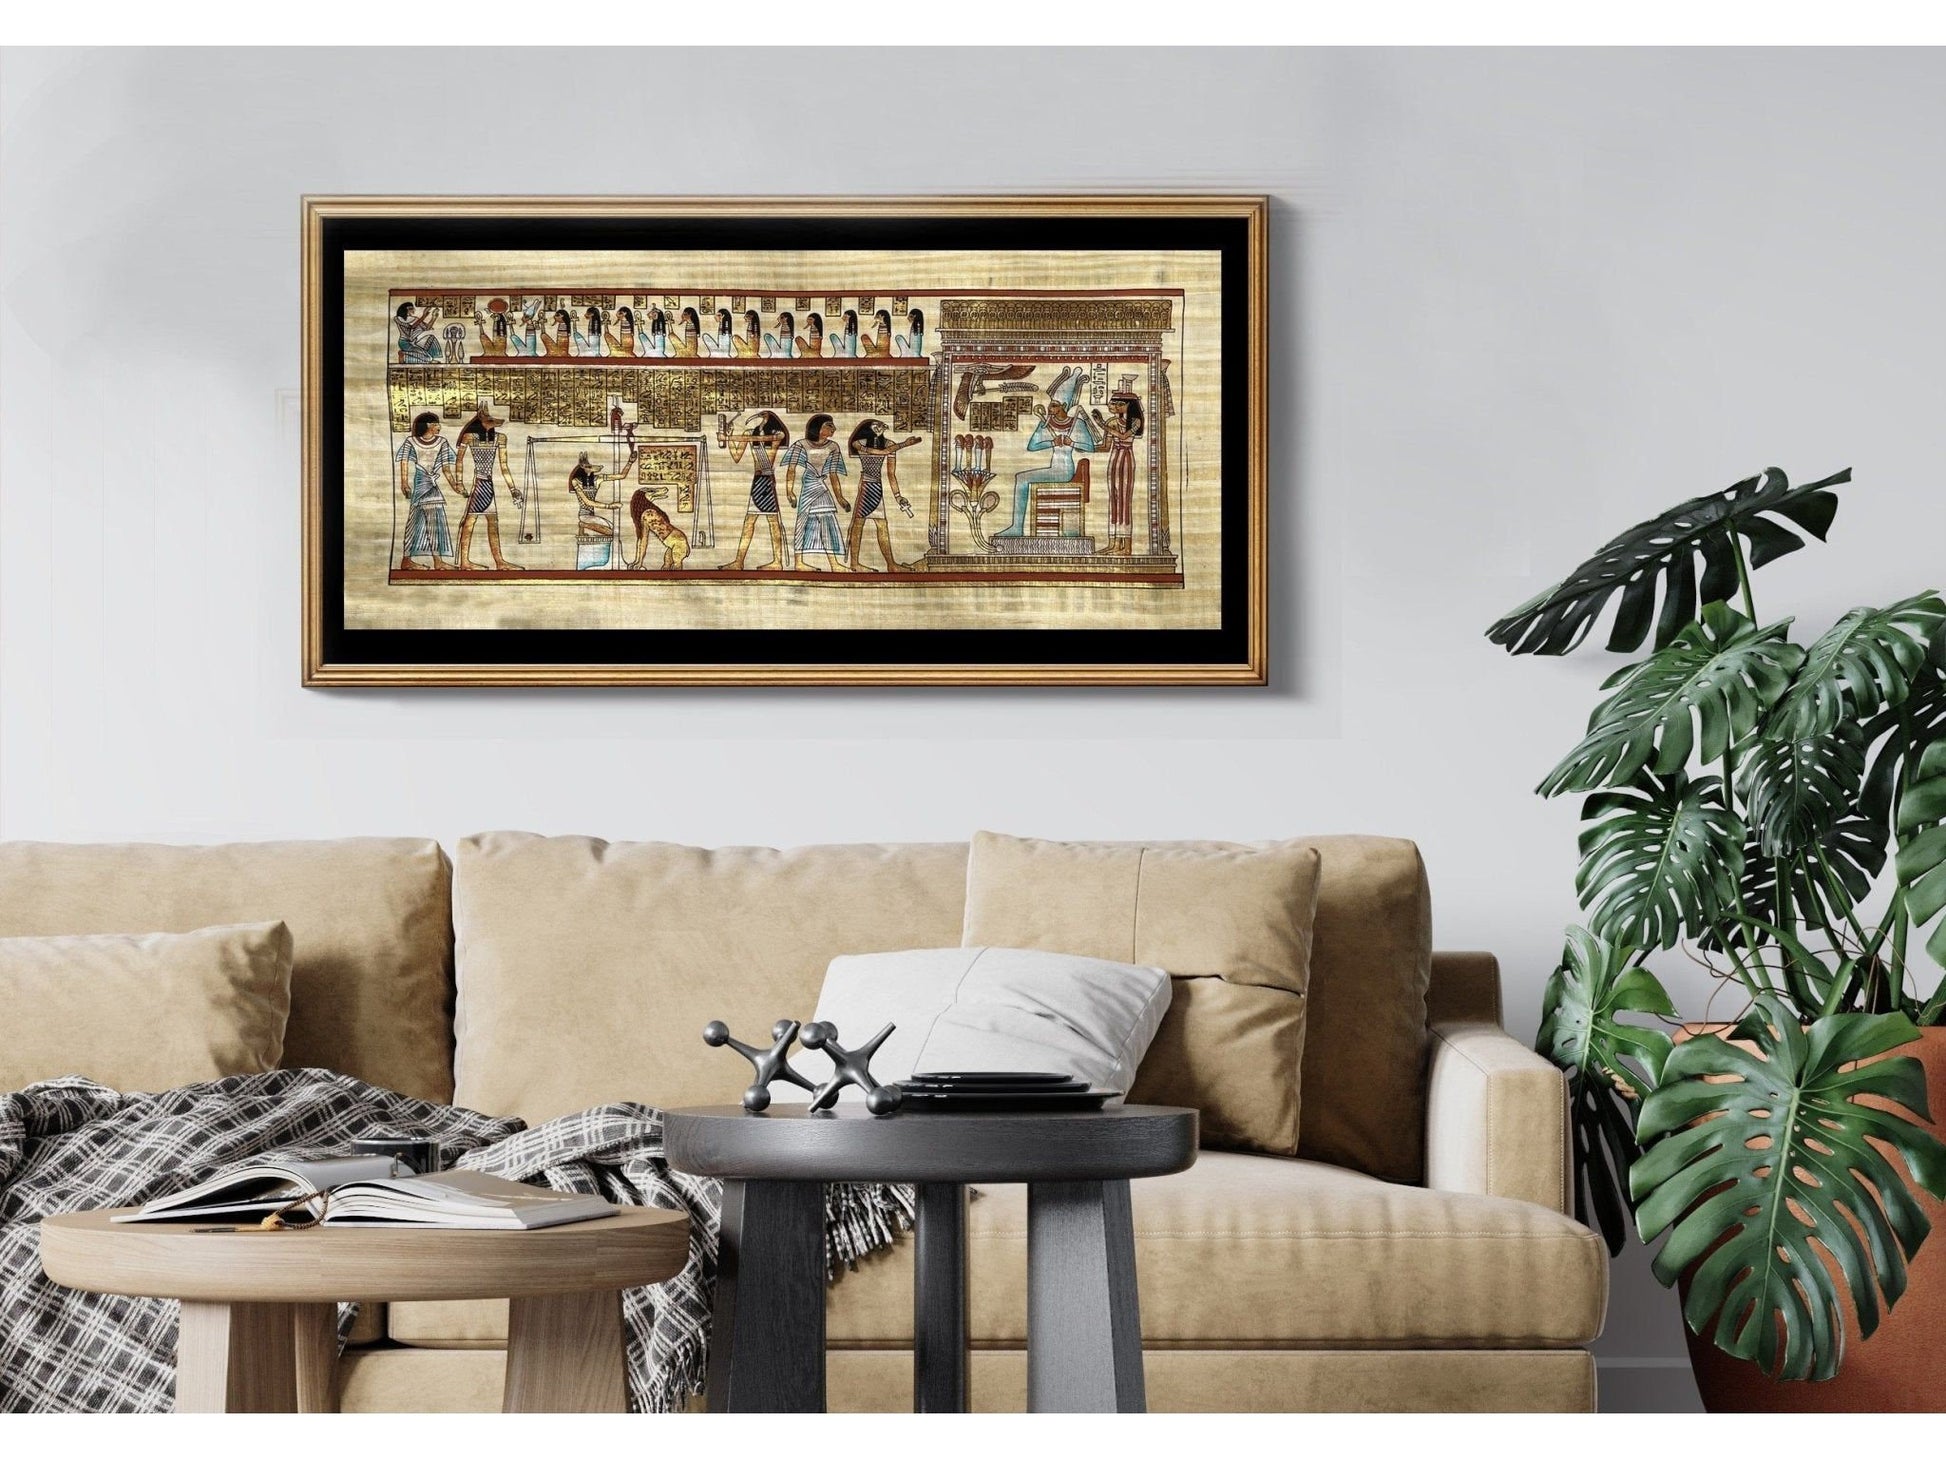 Book of The Dead Last Judgement of Hunefer, Extra Large Egyptian Wall Art Home & Office Wall Decor Ancient Egypt Papyrus Painting